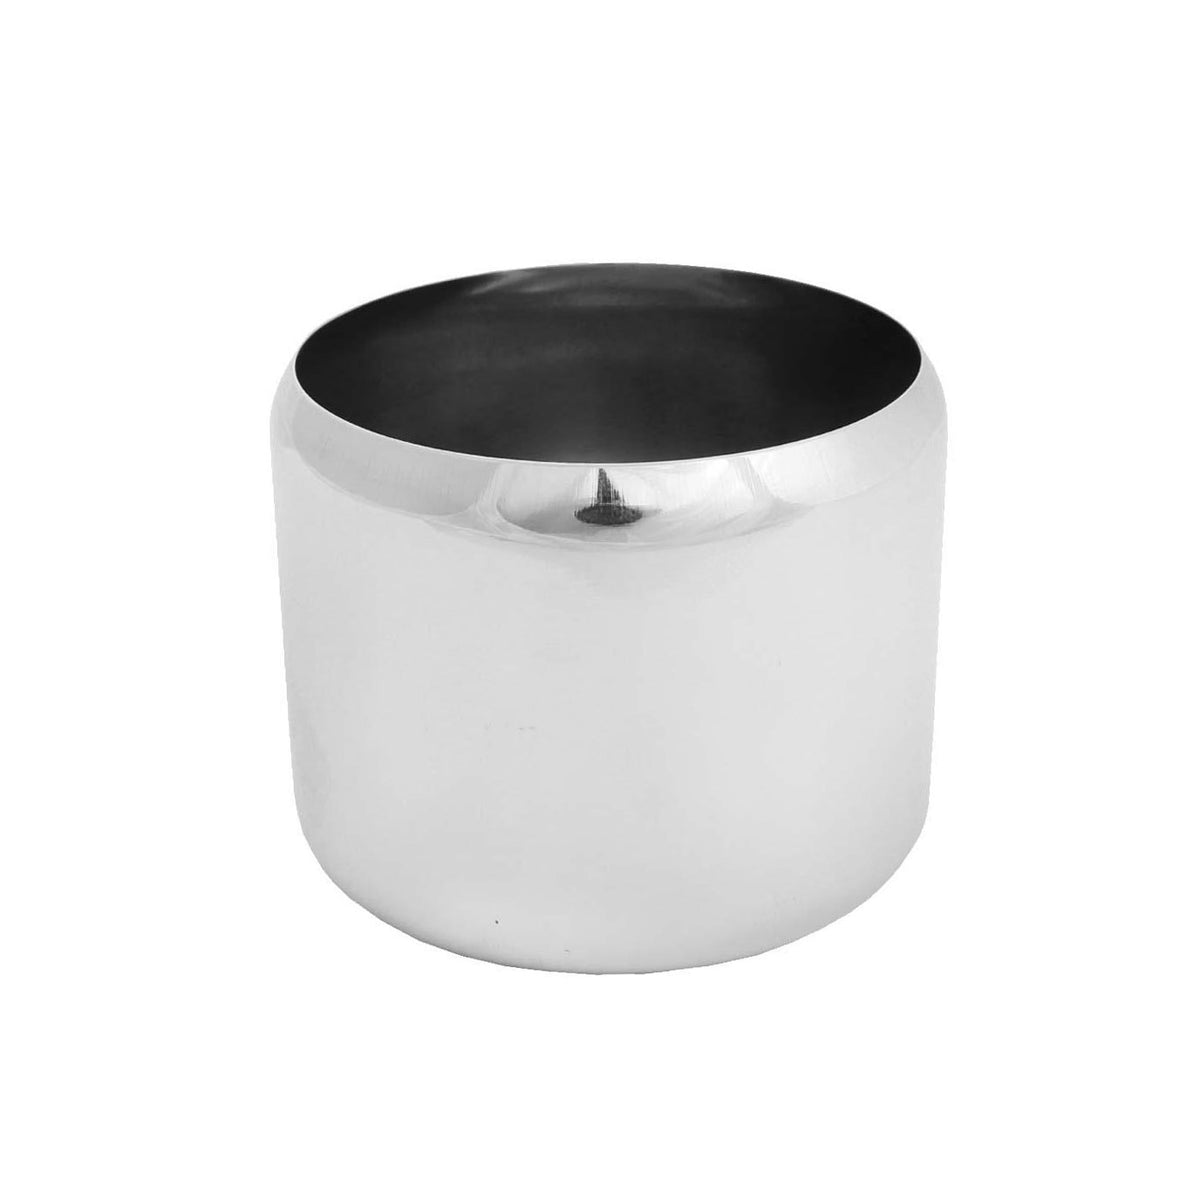 Stainless Steel Sugar Bowl 6oz/18cl              T21433